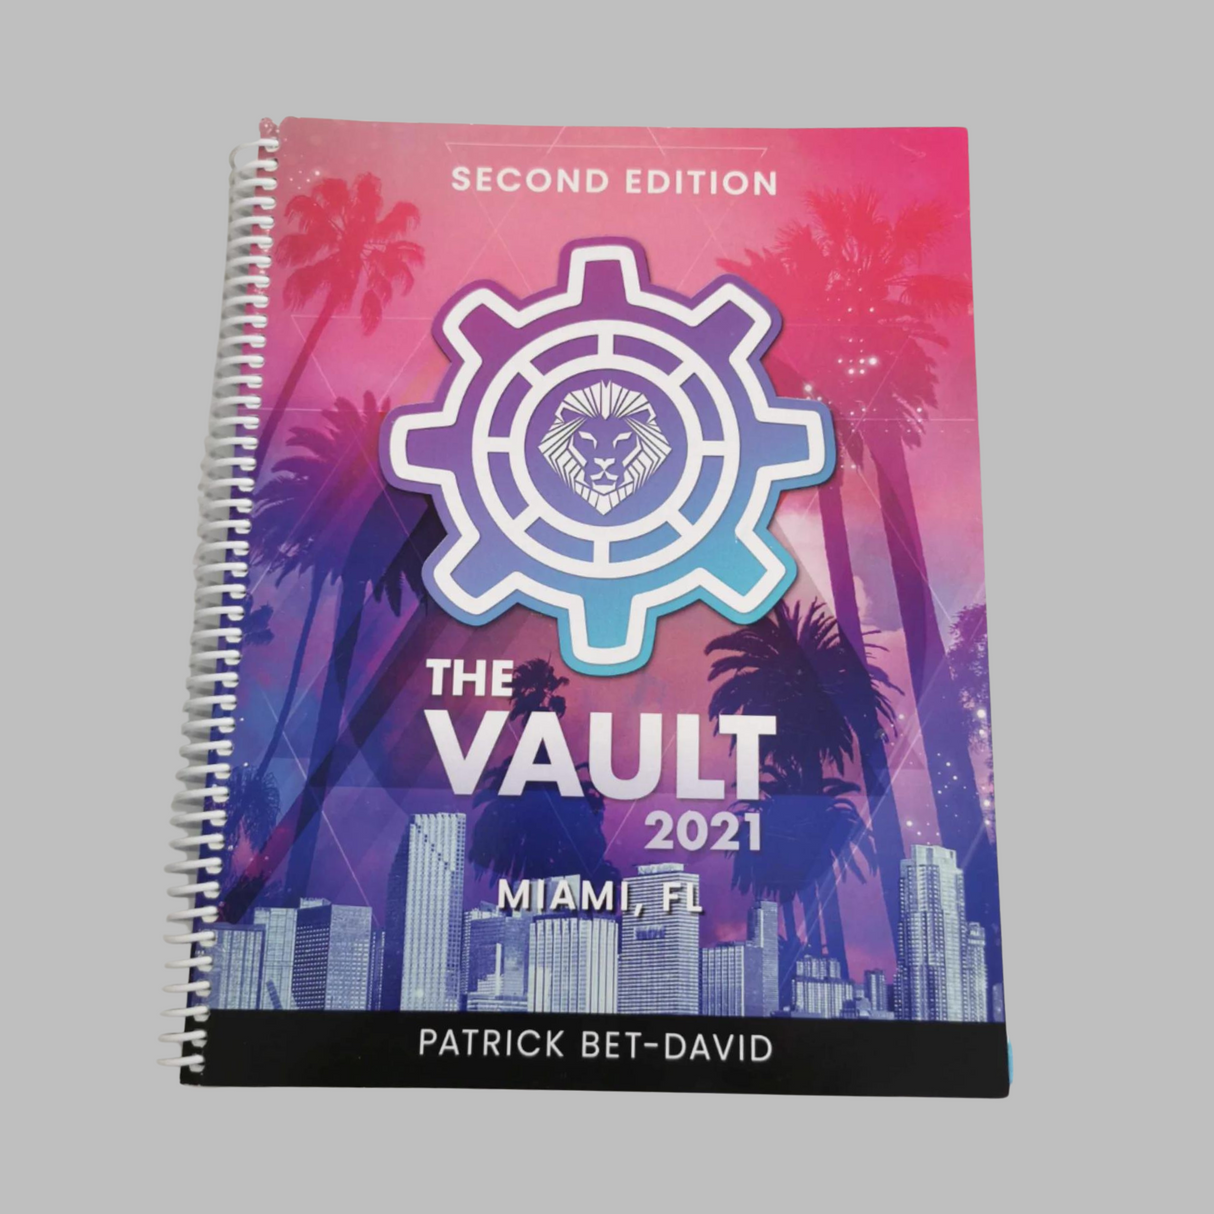 Fill in the Blank Vault 2021 Manual